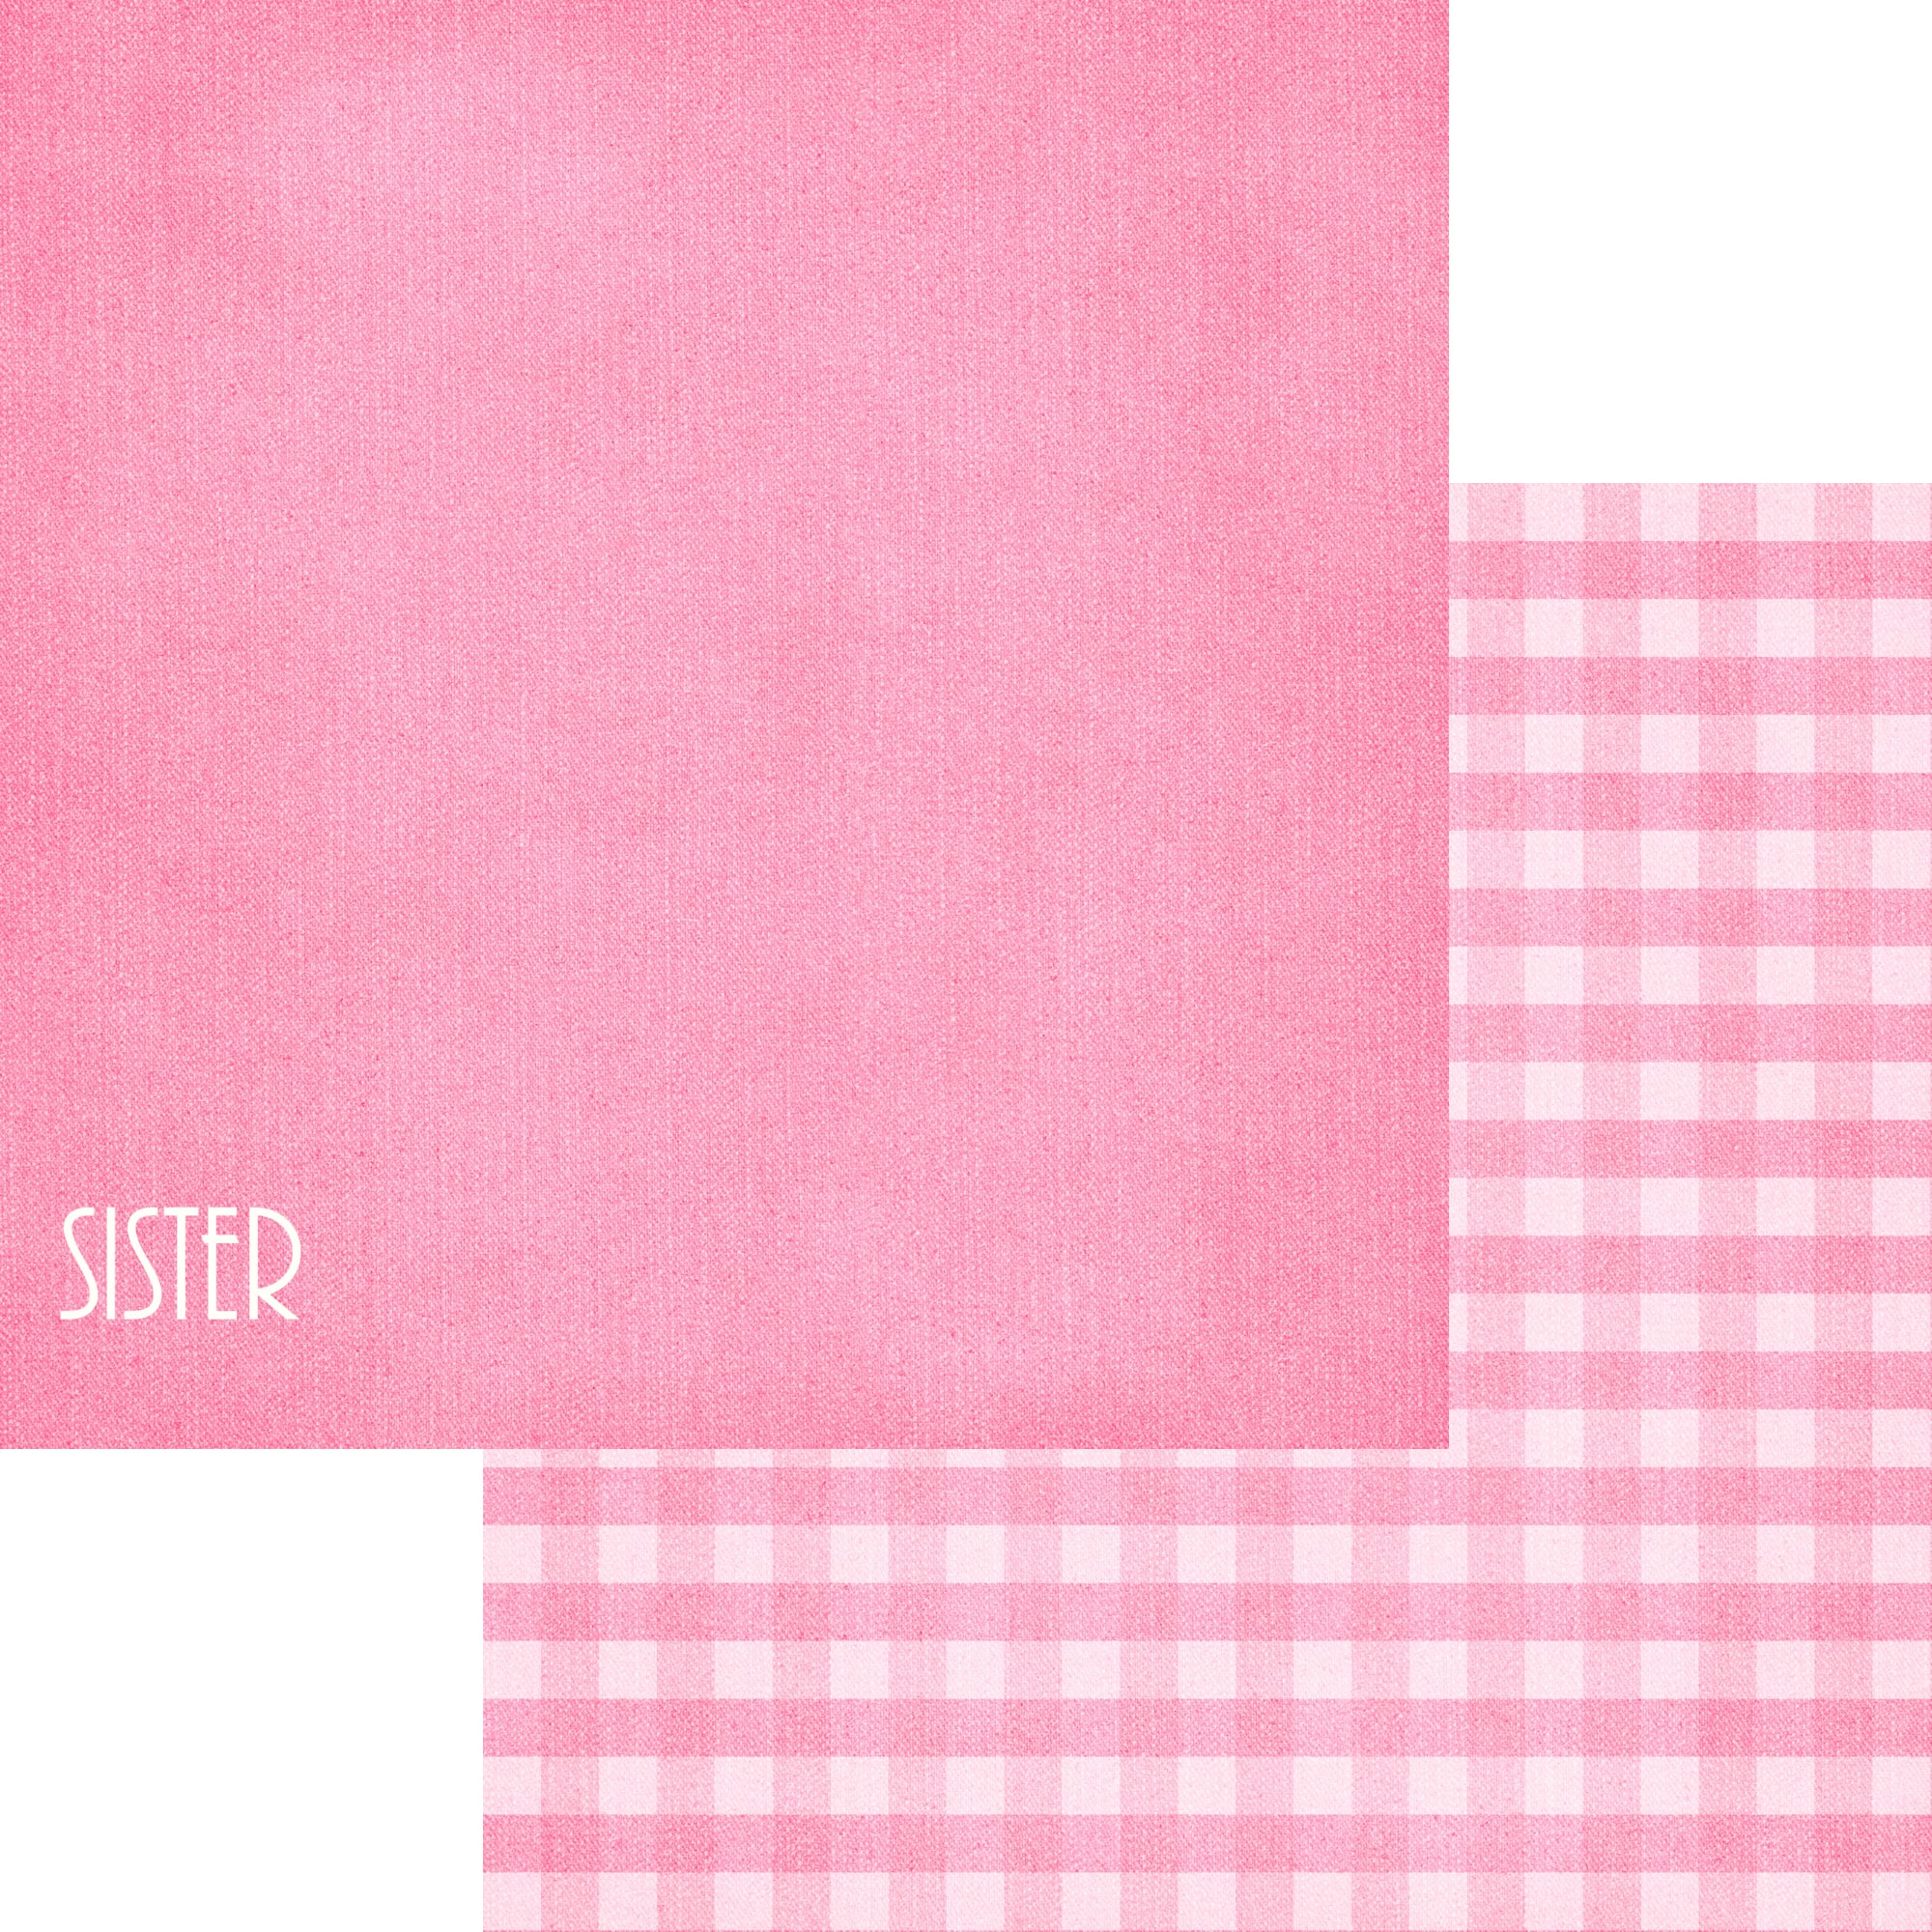 Family Collection Sister 12 x 12 Double-Sided Scrapbook Paper by SSC Designs